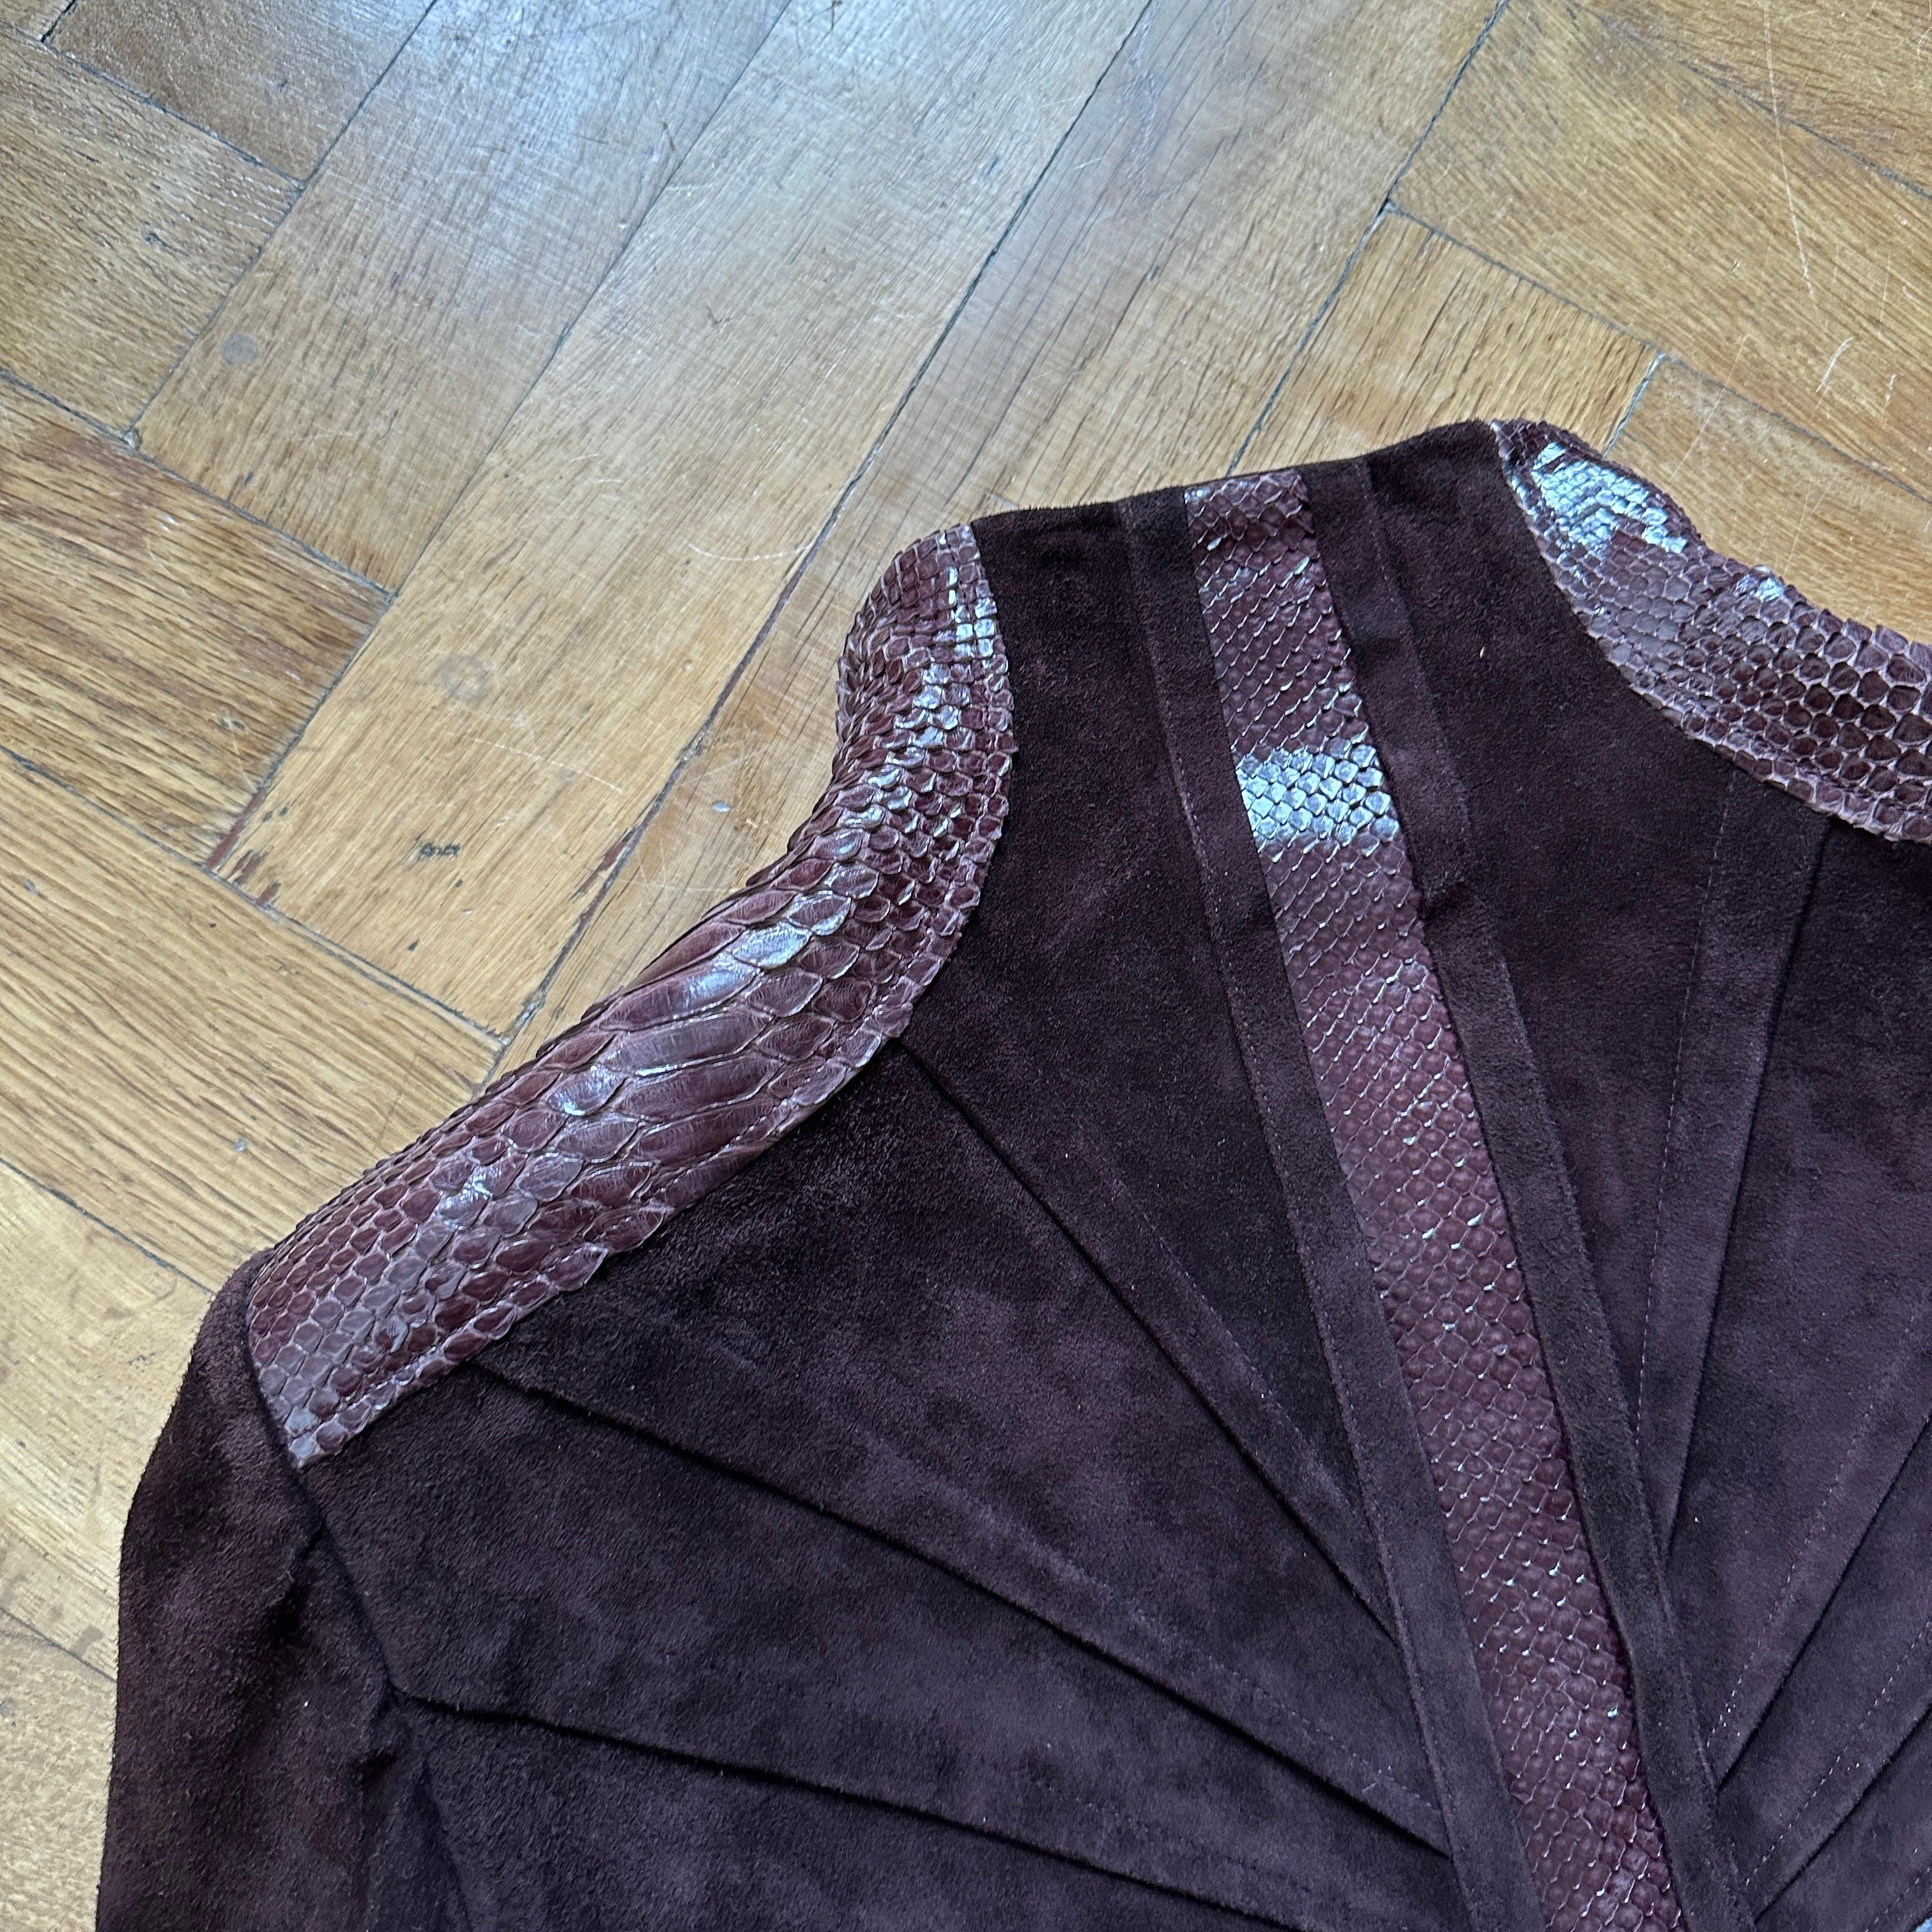 Gucci Spring/Summer 2004 Python Suede Paneled Jacket by Tom Ford 6